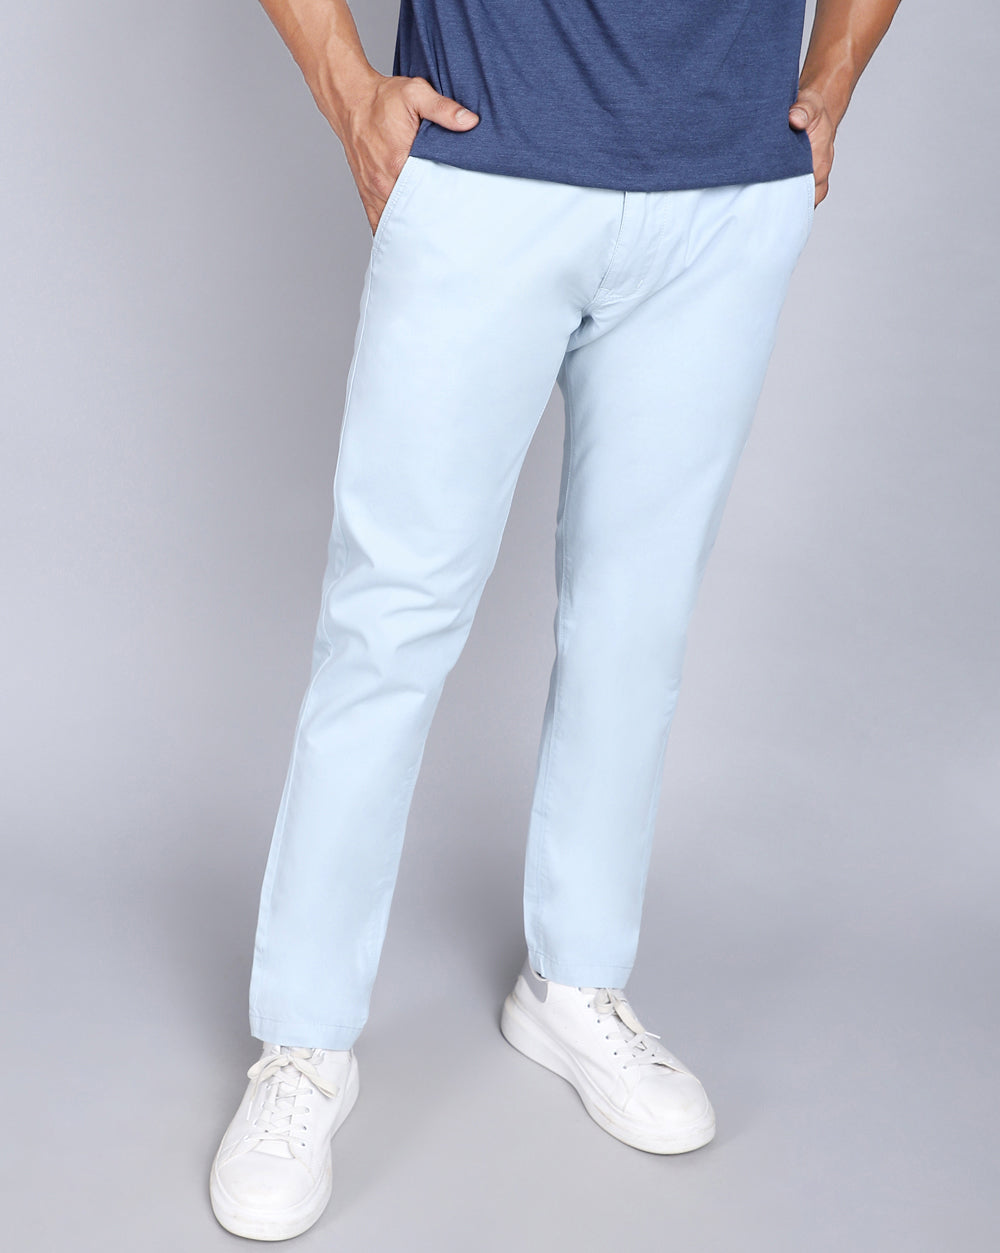 MEYER PANTS IN ICE BLUE BLEACHED DENIM — Shop Boswell